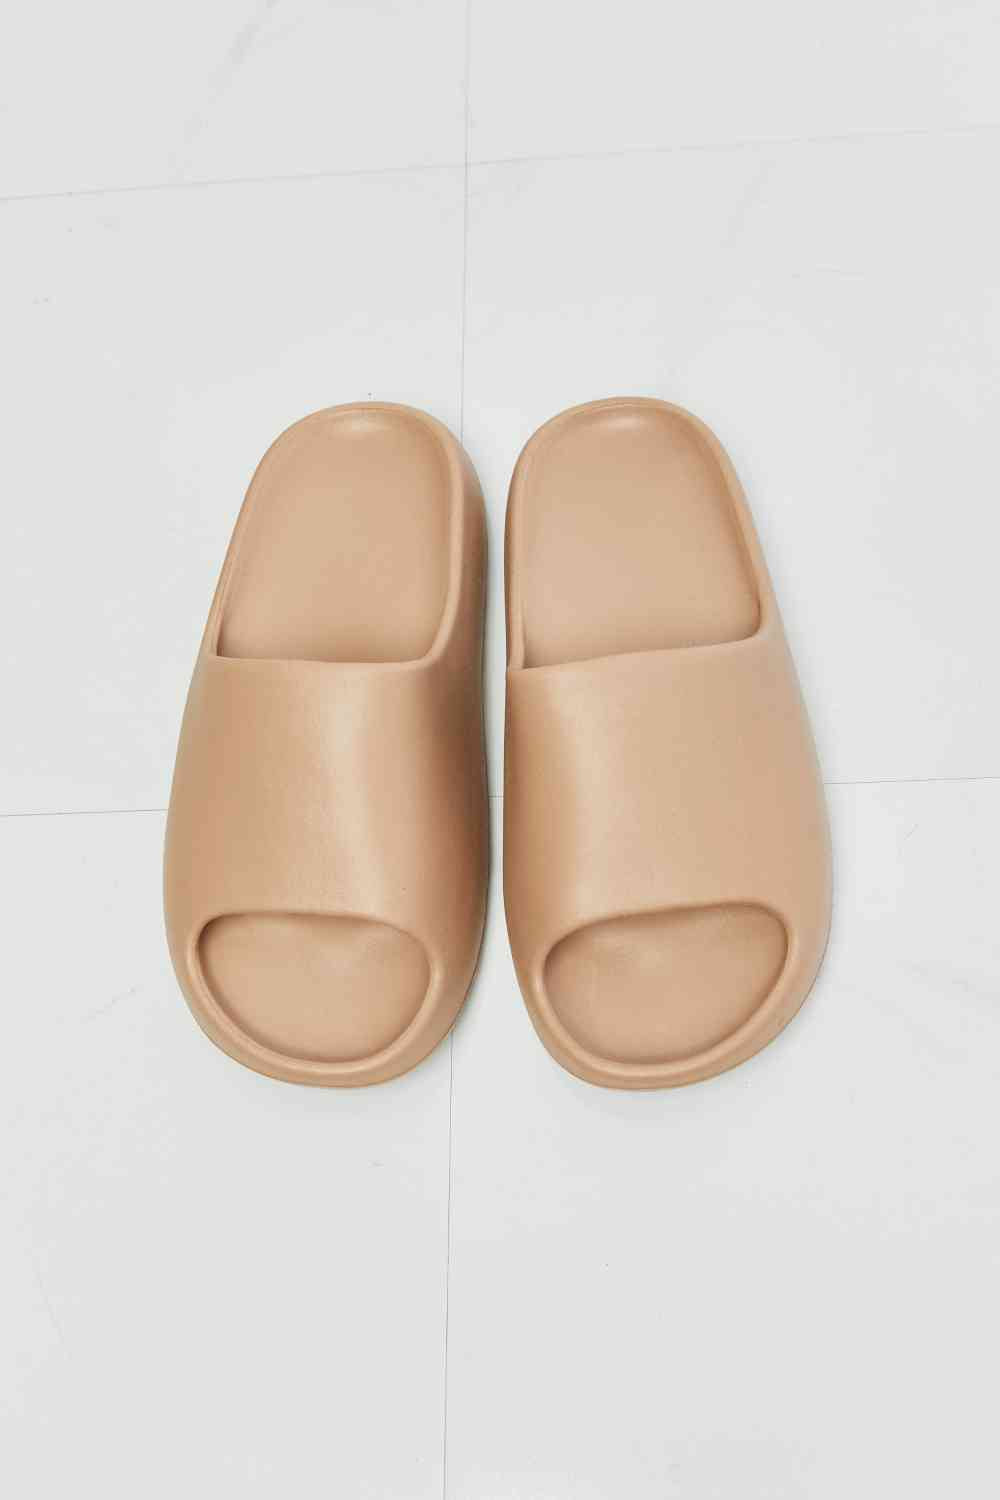 Cloud Comfort Slides Faux Rubber Womens Sandals | Hypoallergenic - Allergy Friendly - Naturally Free